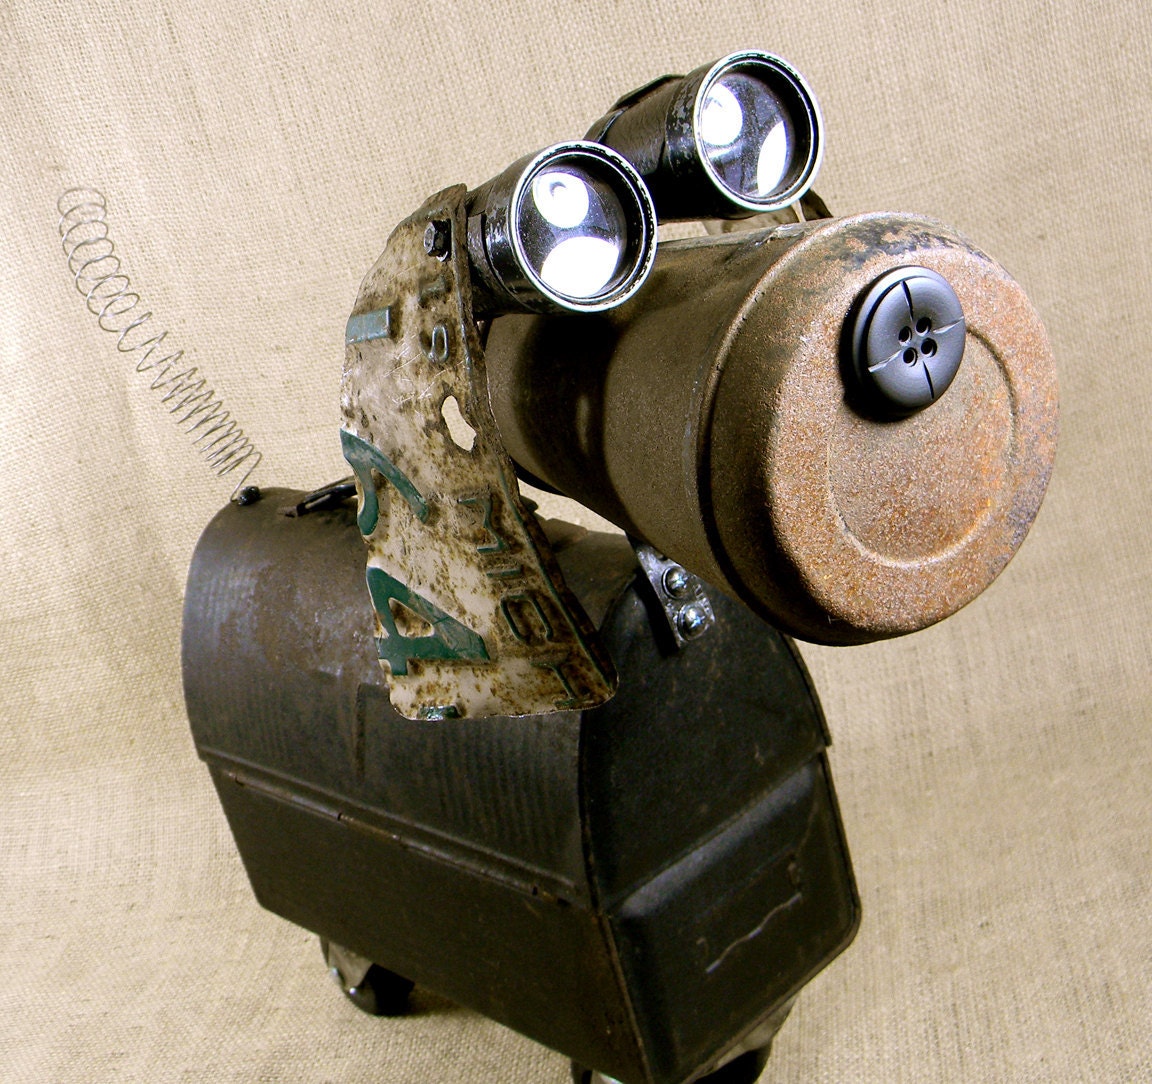 RUSTY - A Robot Dog Assemblage - Reclaim2Fame